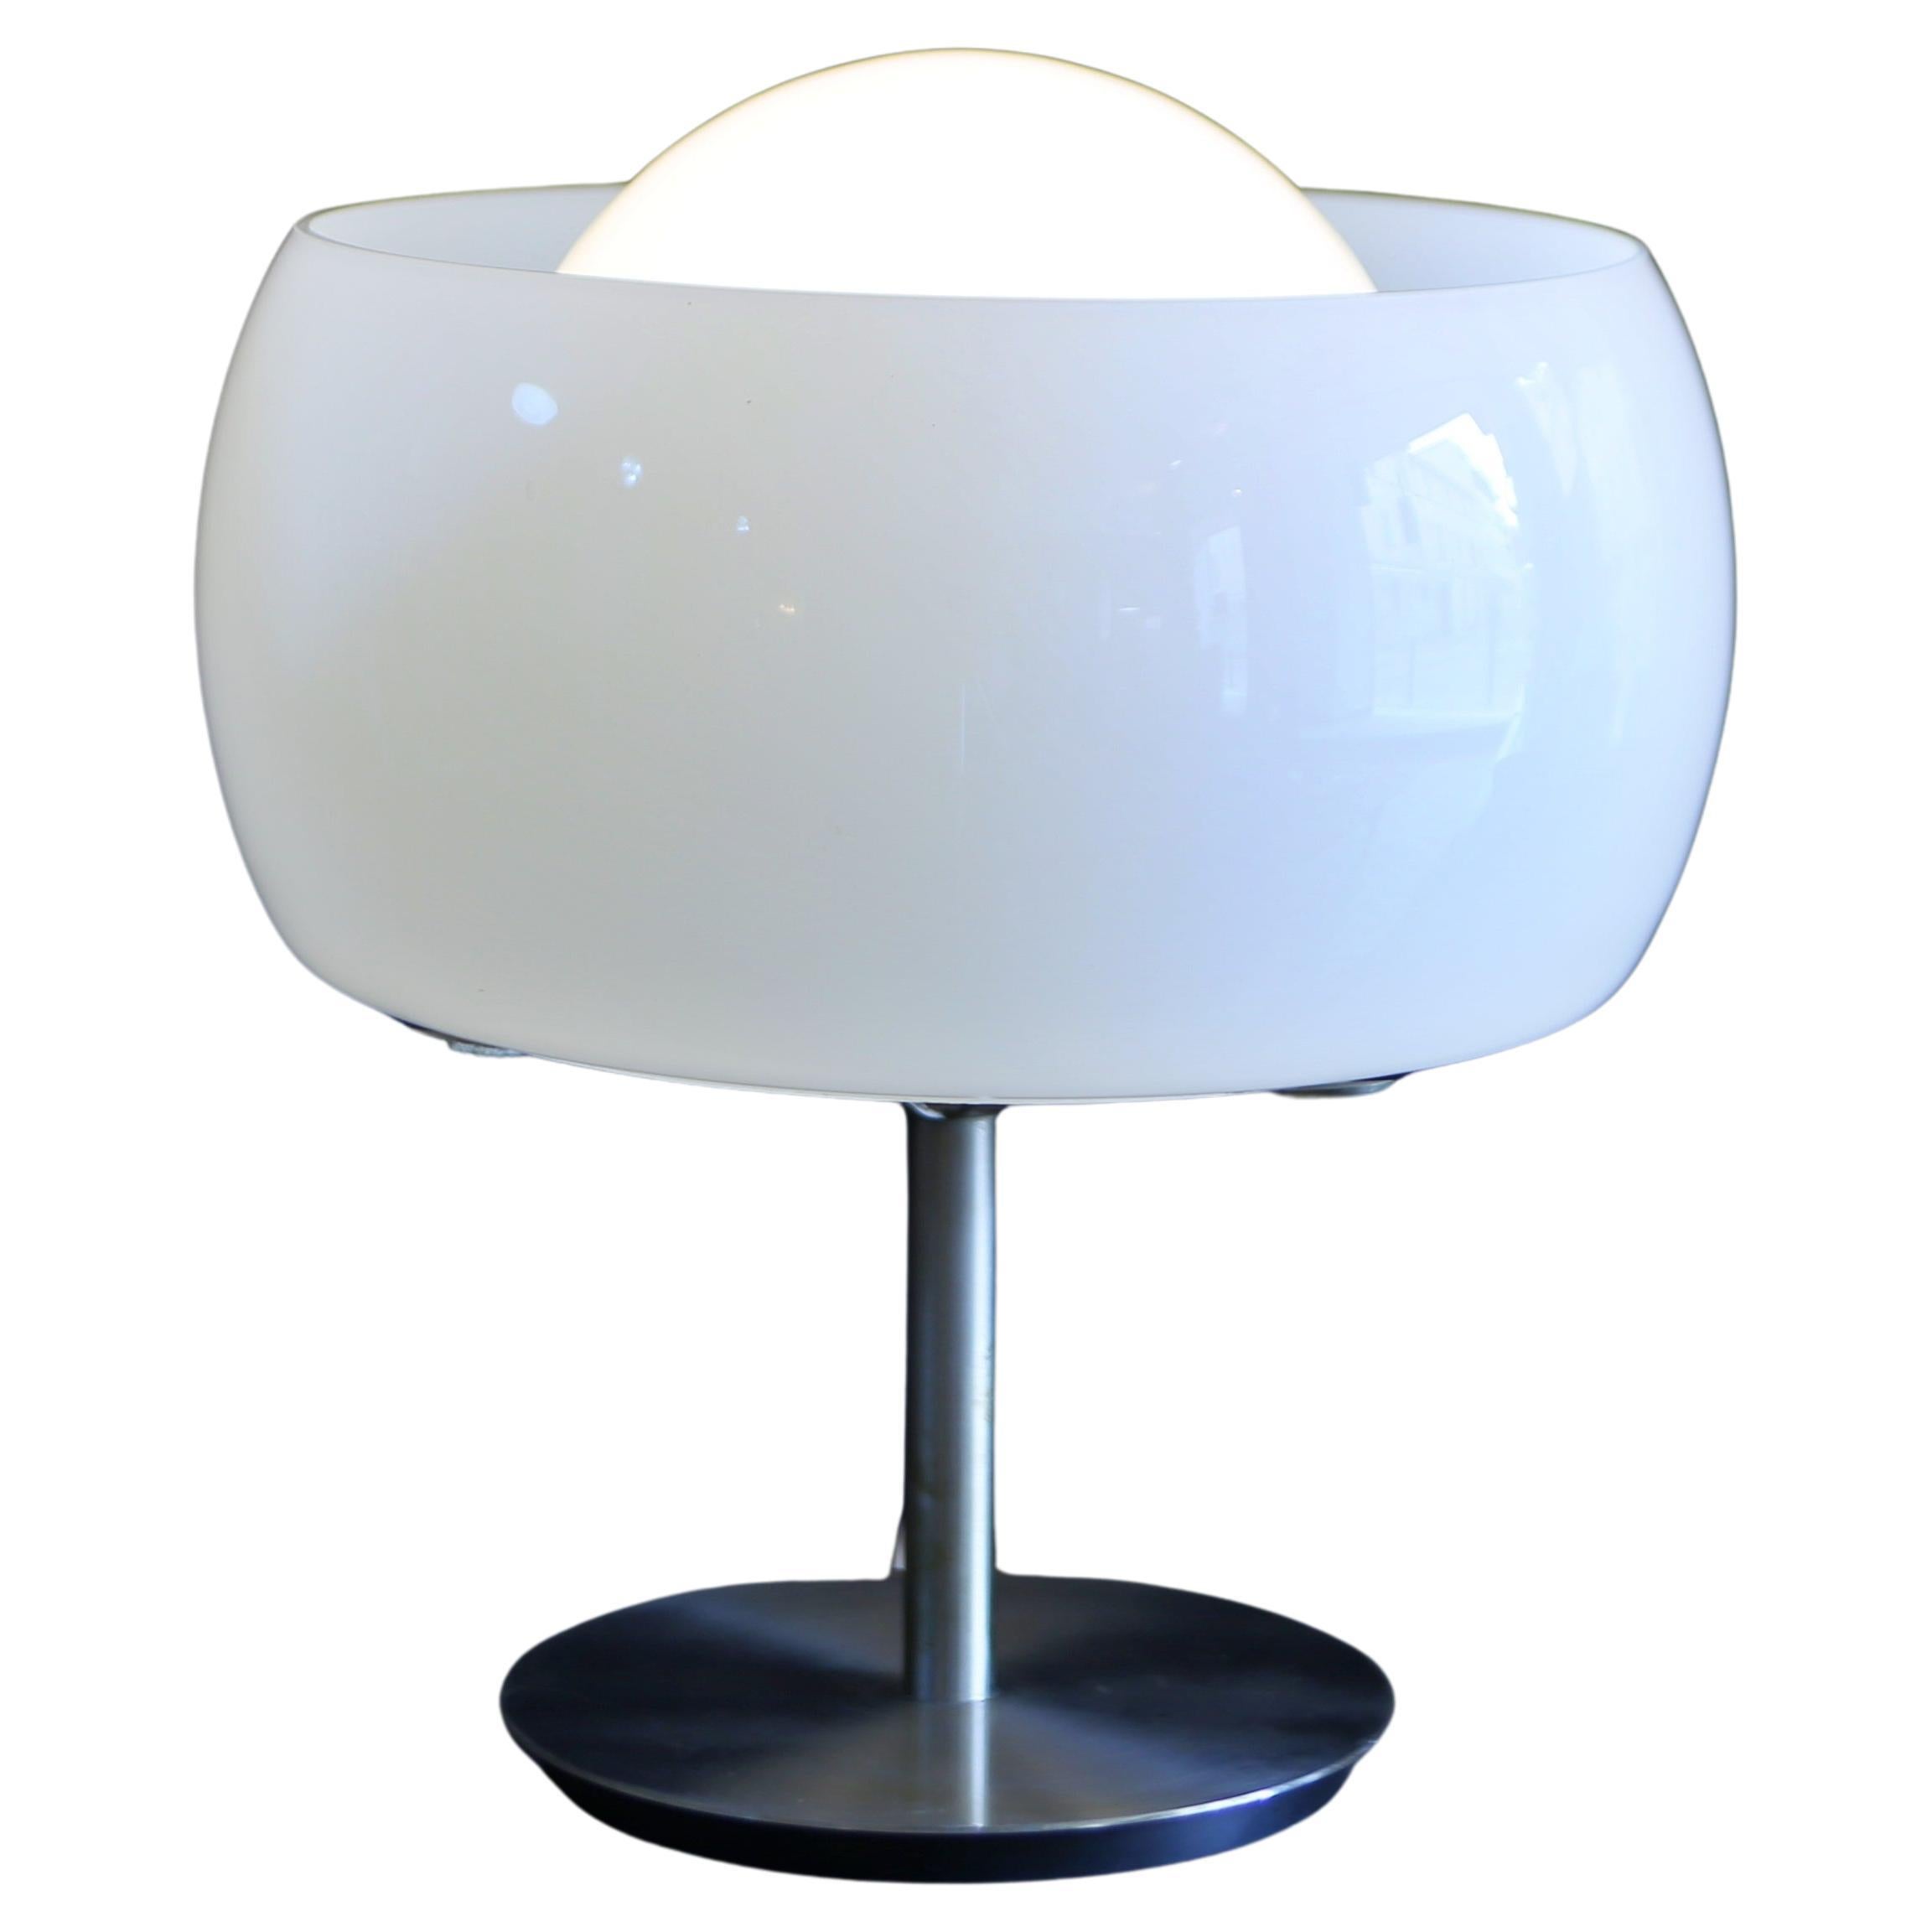 'Erse' Table Lamp by Vico Magistretti for Artemide 1964